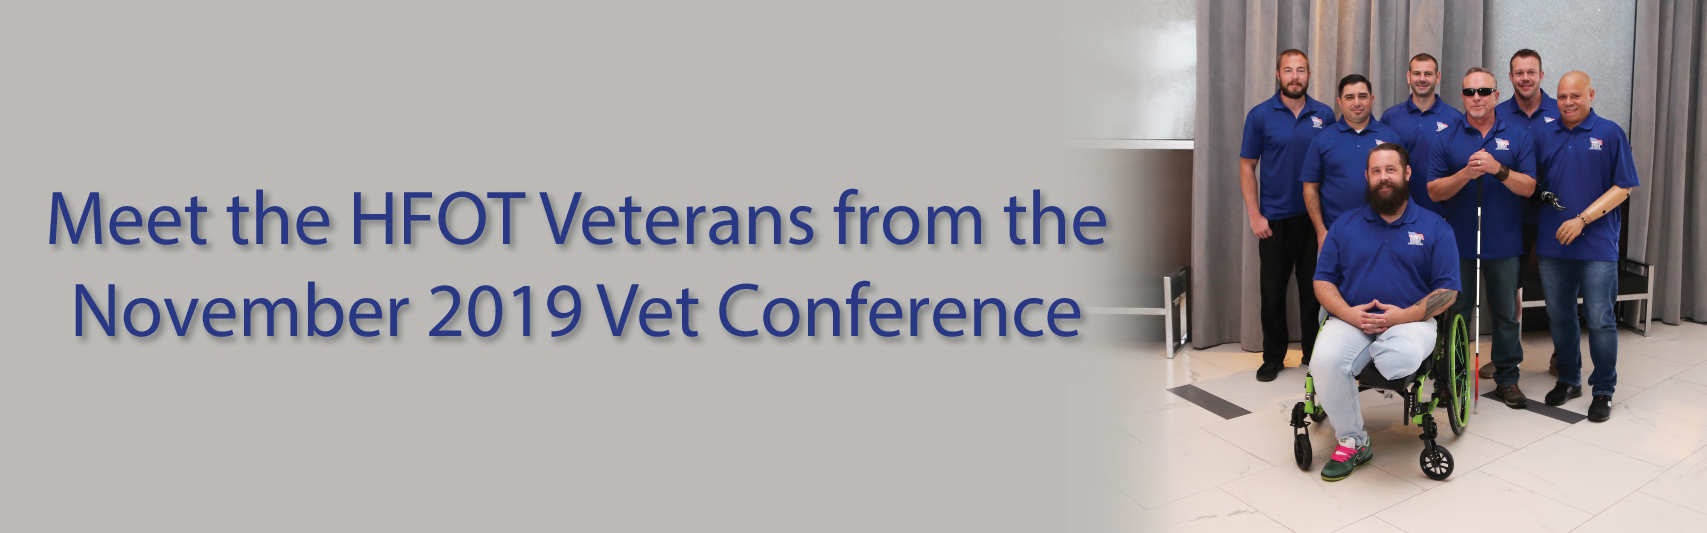 HFOT Welcomes New Veterans into our Family